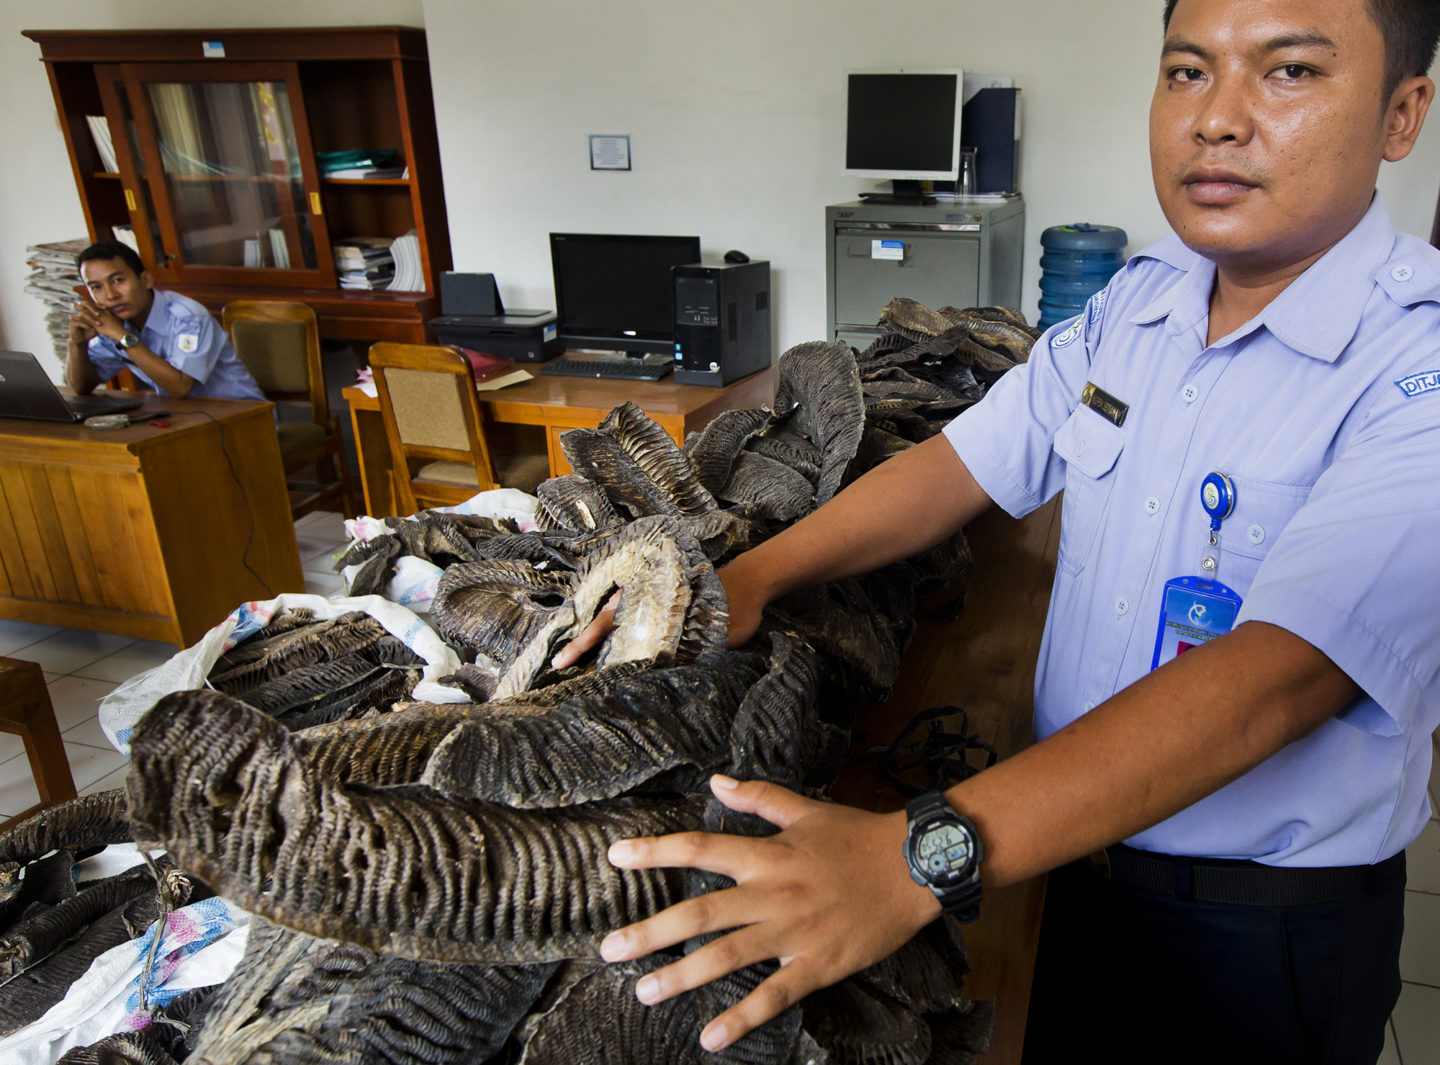 548A8370-3-1_Ministry-of-Fisheries-personnel-display-confiscated-manta-ray-gills-1440x1065.jpg